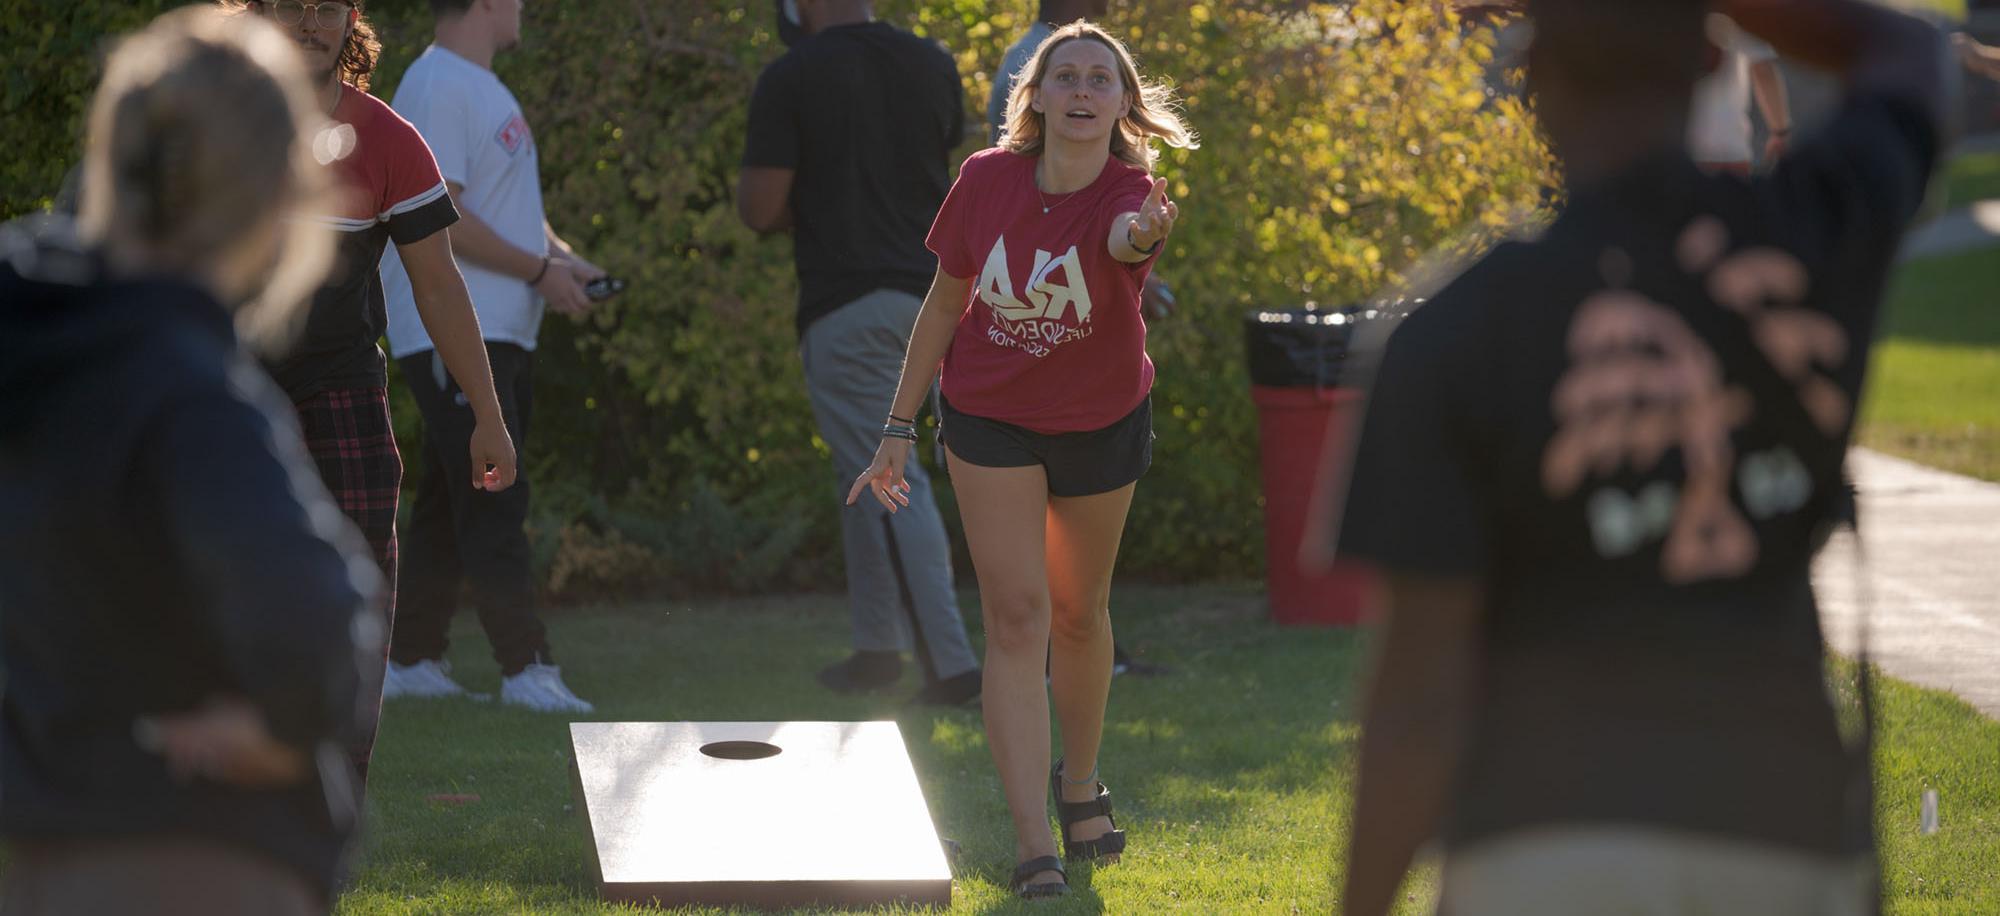 Students playing a bean bag toss